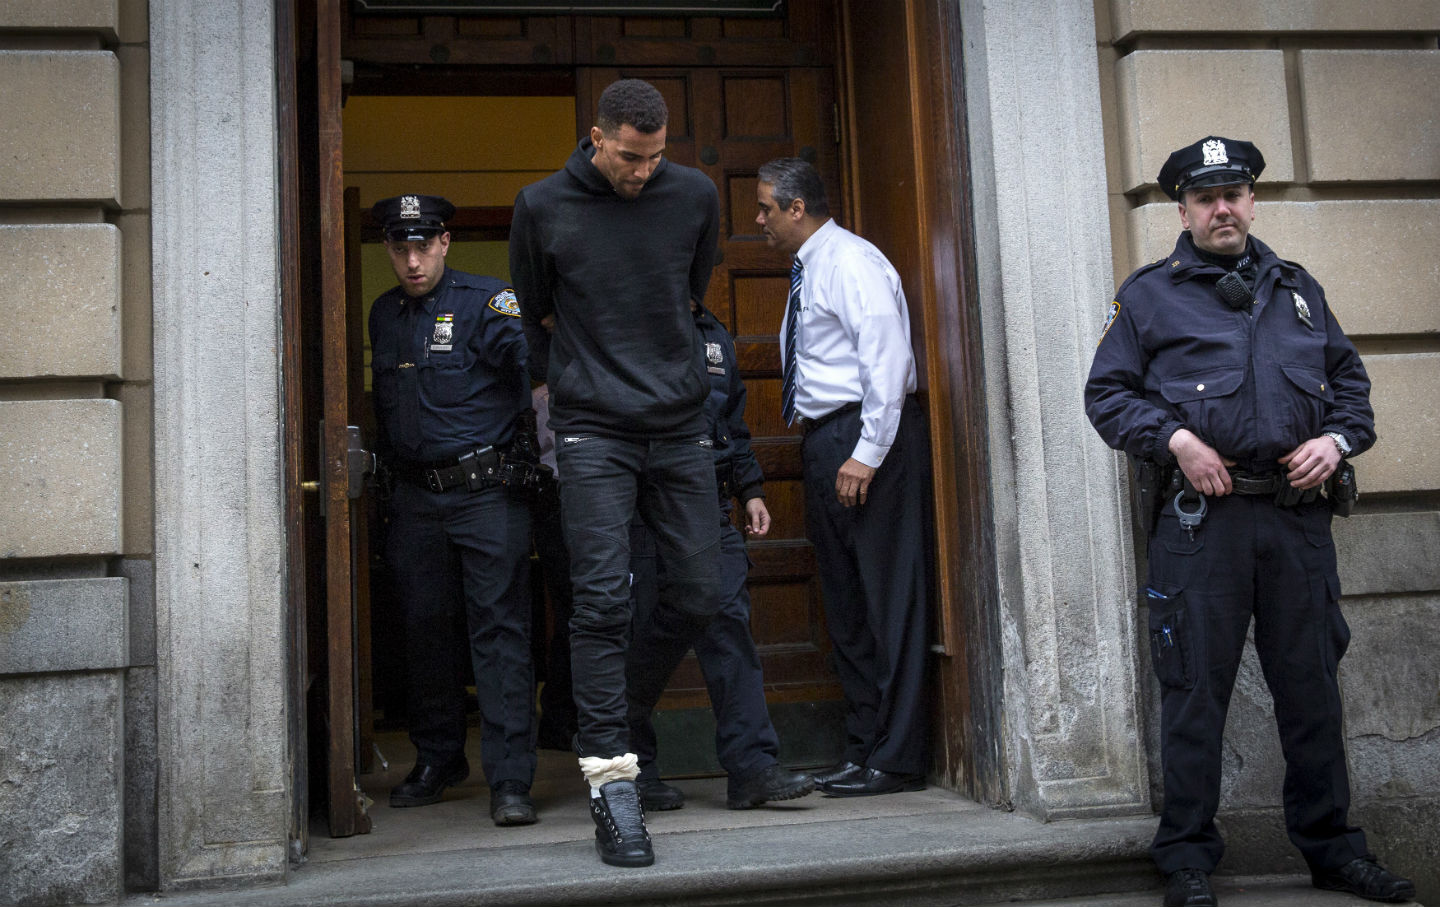 So… the NYPD Just Broke an NBA Player’s Leg